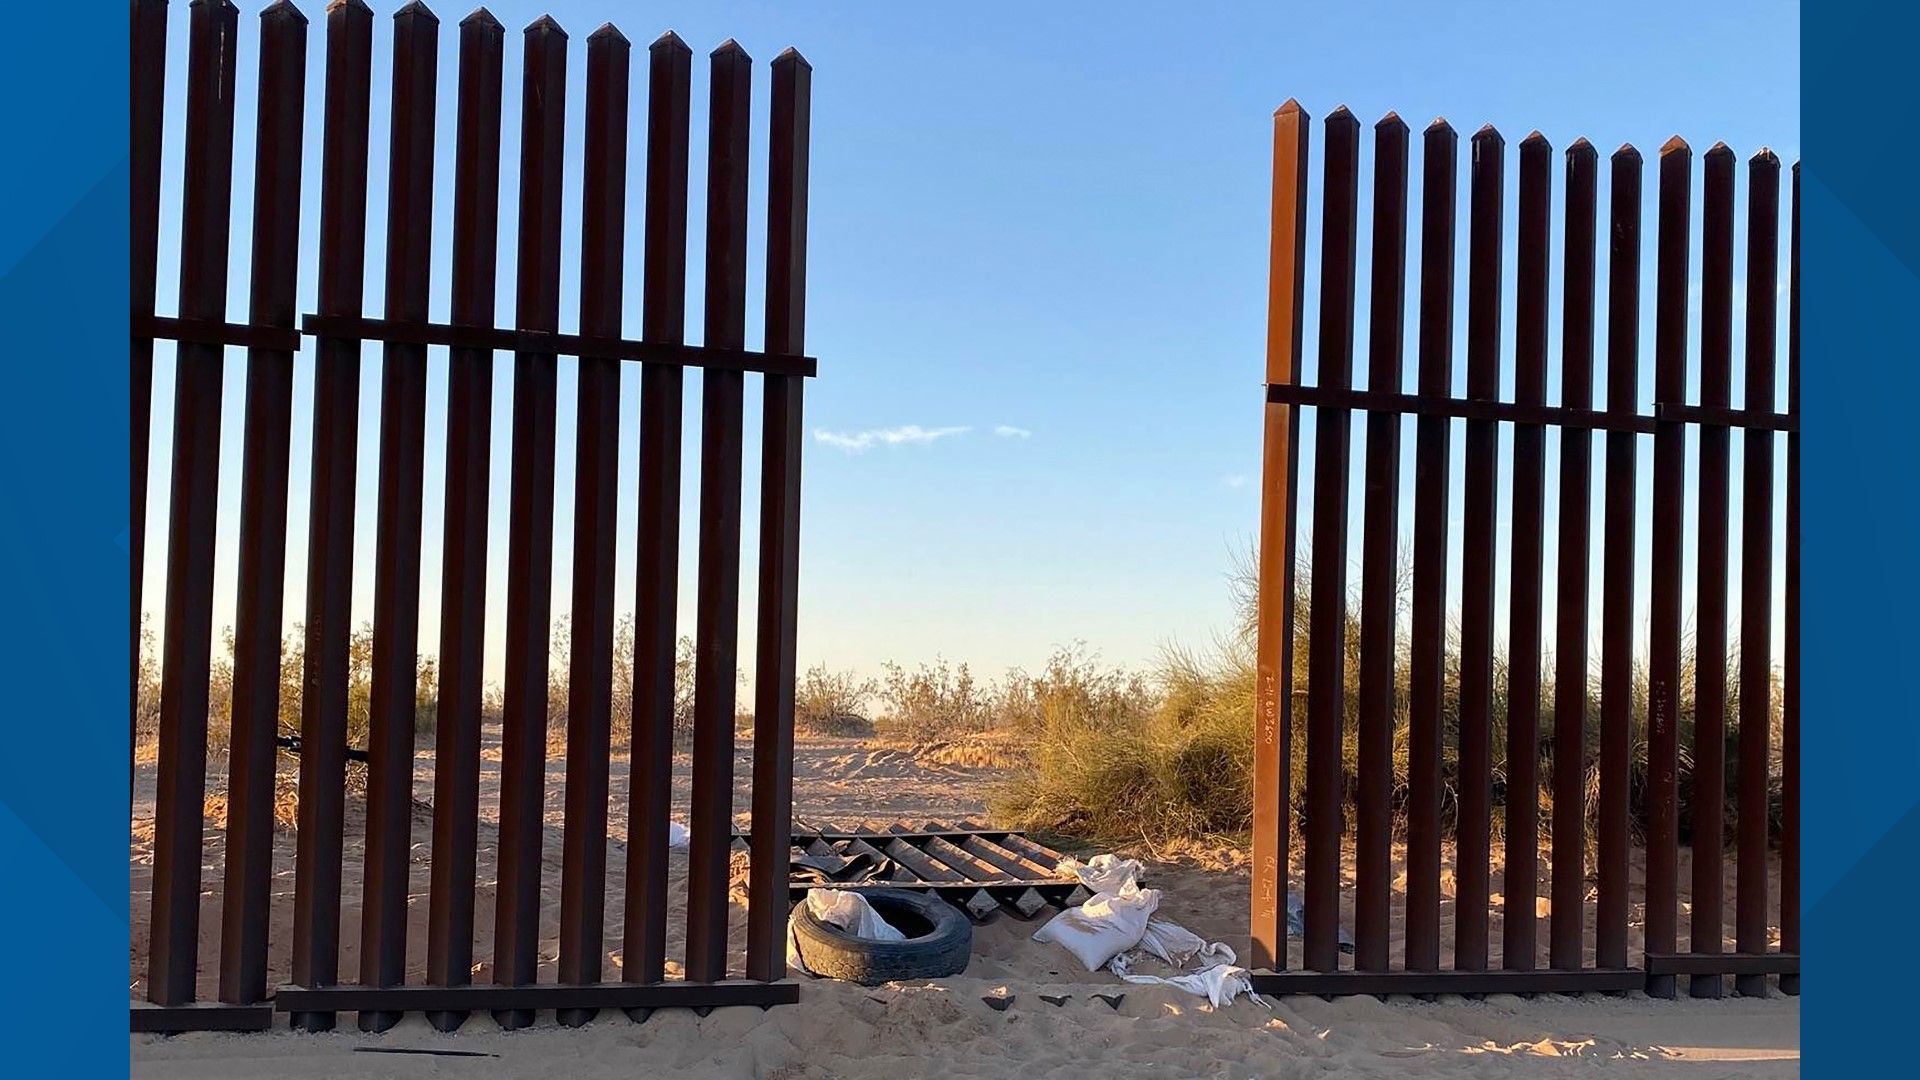 The hole in the fence that allowed 2 vehicles through with undocumented immigrants has been repaired by Border Patrol the day after the horrific crash.